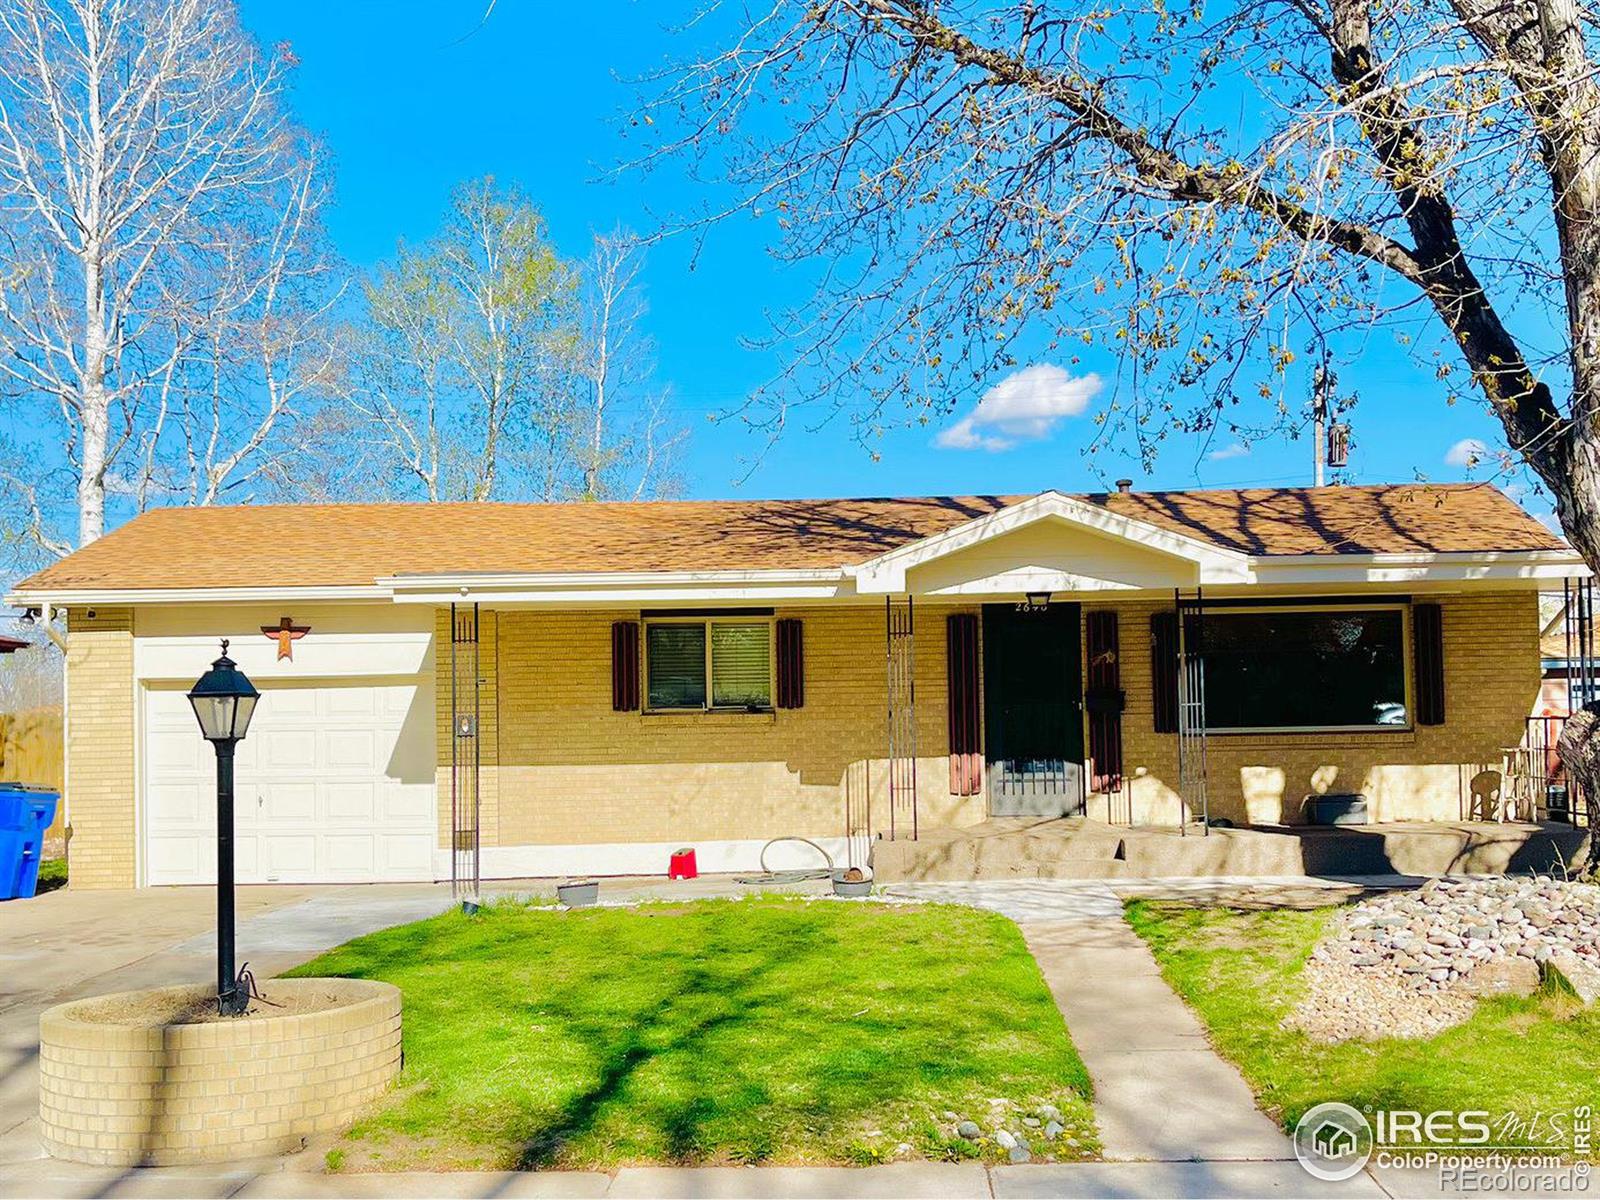 2646  12th Ave Ct, greeley MLS: 4567891007552 Beds: 4 Baths: 2 Price: $390,000